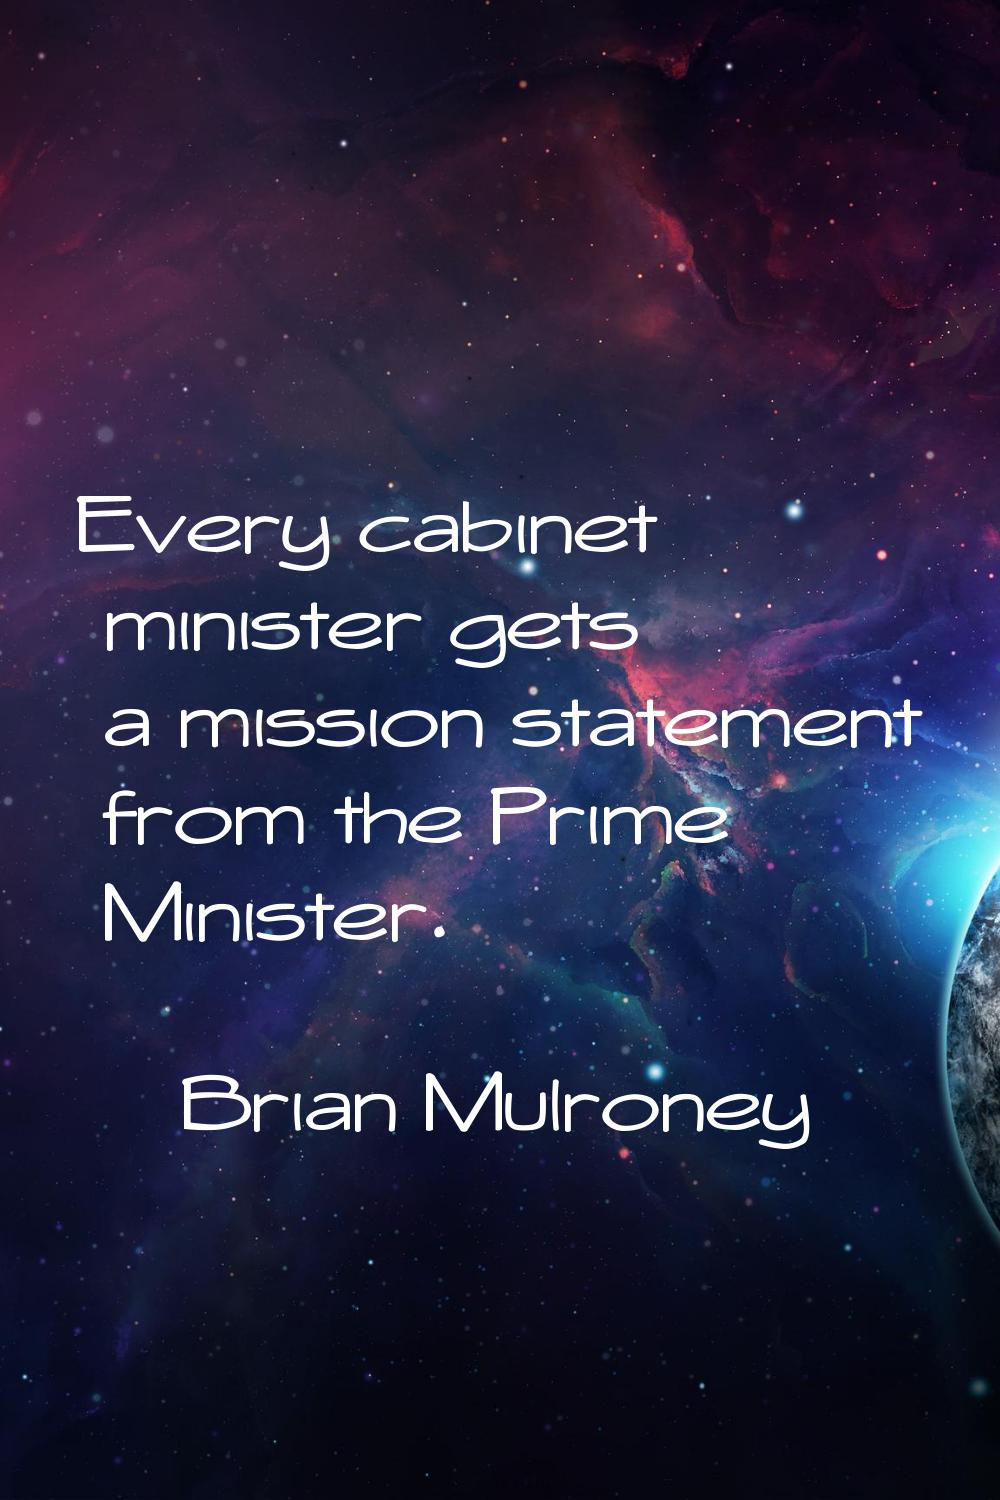 Every cabinet minister gets a mission statement from the Prime Minister.